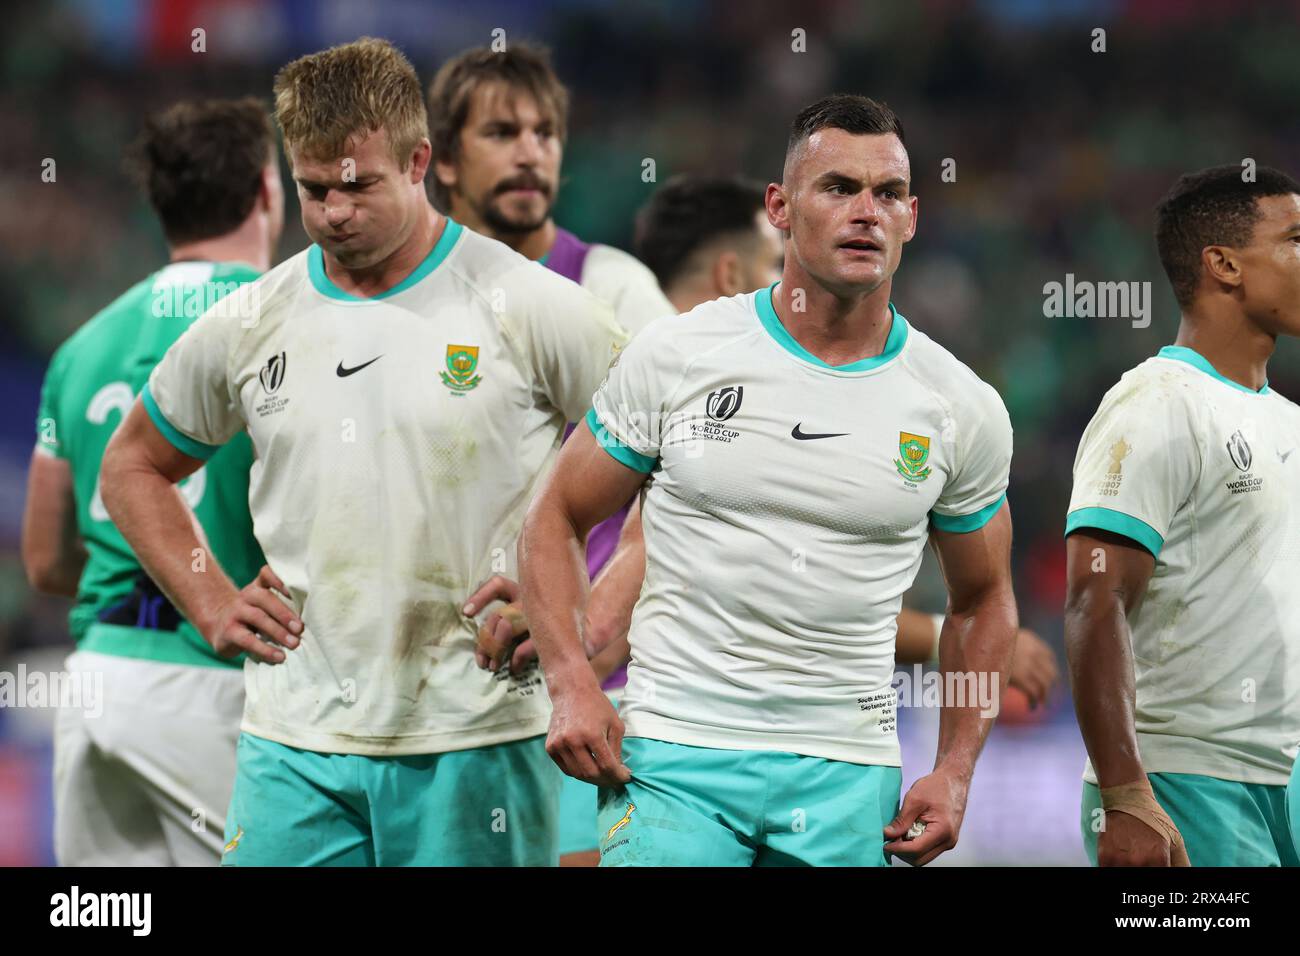 South Africa's Jesse Kriel during the 2023 Rugby World Cup Pool B match between South Africa and Ireland at the Stade de France in Saint-Denis, outside Paris, Saturday, Sept. 23, 2023. Credit: Aki Nagao/AFLO/Alamy Live News Stock Photo